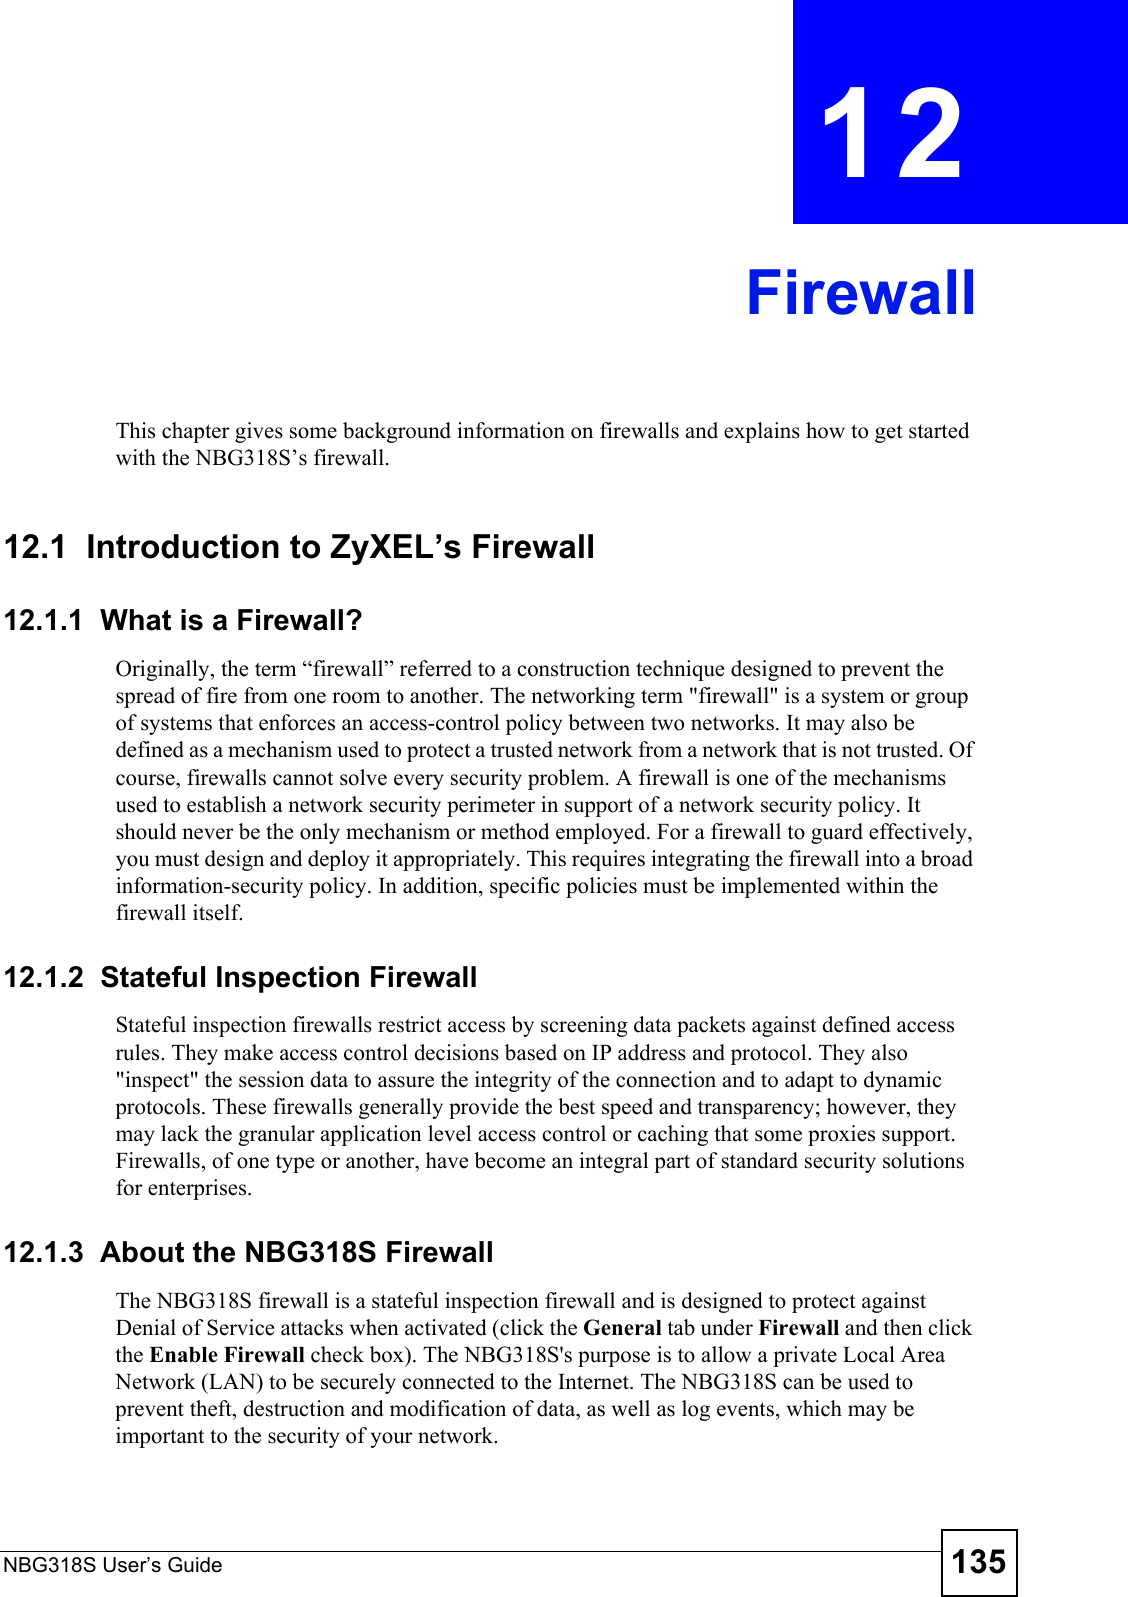 NBG318S User’s Guide 135CHAPTER  12  FirewallThis chapter gives some background information on firewalls and explains how to get started with the NBG318S’s firewall.12.1  Introduction to ZyXEL’s Firewall   12.1.1  What is a Firewall?Originally, the term “firewall” referred to a construction technique designed to prevent the spread of fire from one room to another. The networking term &quot;firewall&quot; is a system or group of systems that enforces an access-control policy between two networks. It may also be defined as a mechanism used to protect a trusted network from a network that is not trusted. Of course, firewalls cannot solve every security problem. A firewall is one of the mechanisms used to establish a network security perimeter in support of a network security policy. It should never be the only mechanism or method employed. For a firewall to guard effectively, you must design and deploy it appropriately. This requires integrating the firewall into a broad information-security policy. In addition, specific policies must be implemented within the firewall itself. 12.1.2  Stateful Inspection Firewall Stateful inspection firewalls restrict access by screening data packets against defined access rules. They make access control decisions based on IP address and protocol. They also &quot;inspect&quot; the session data to assure the integrity of the connection and to adapt to dynamic protocols. These firewalls generally provide the best speed and transparency; however, they may lack the granular application level access control or caching that some proxies support. Firewalls, of one type or another, have become an integral part of standard security solutions for enterprises.12.1.3  About the NBG318S FirewallThe NBG318S firewall is a stateful inspection firewall and is designed to protect against Denial of Service attacks when activated (click the General tab under Firewall and then click the Enable Firewall check box). The NBG318S&apos;s purpose is to allow a private Local Area Network (LAN) to be securely connected to the Internet. The NBG318S can be used to prevent theft, destruction and modification of data, as well as log events, which may be important to the security of your network. 